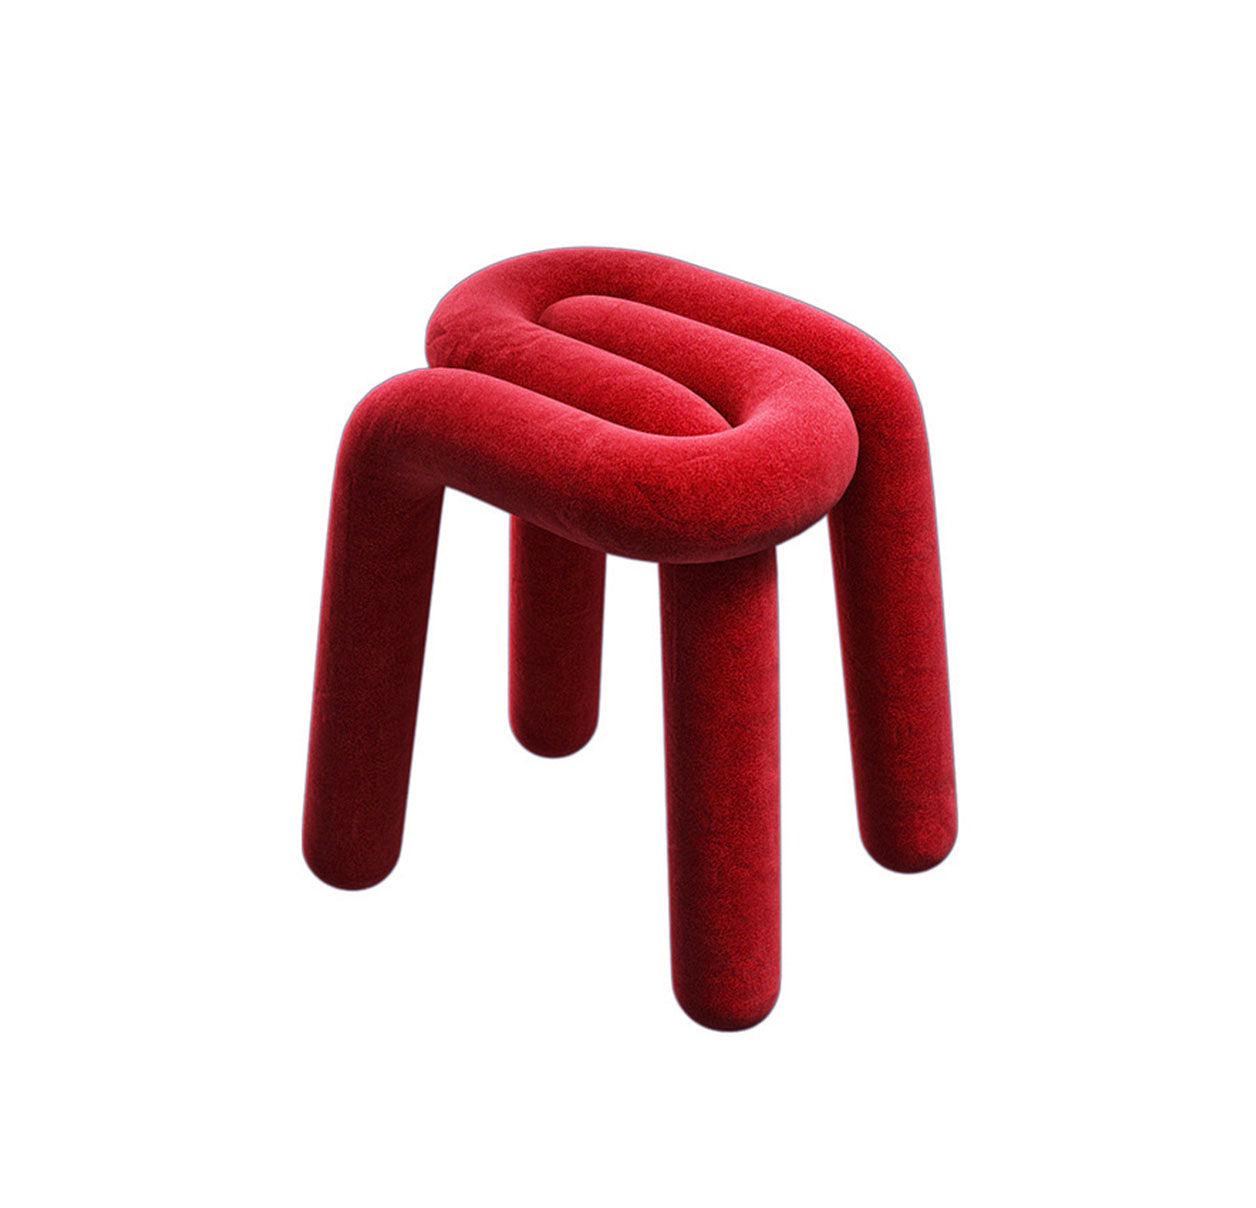 The Red Contemporary Stool